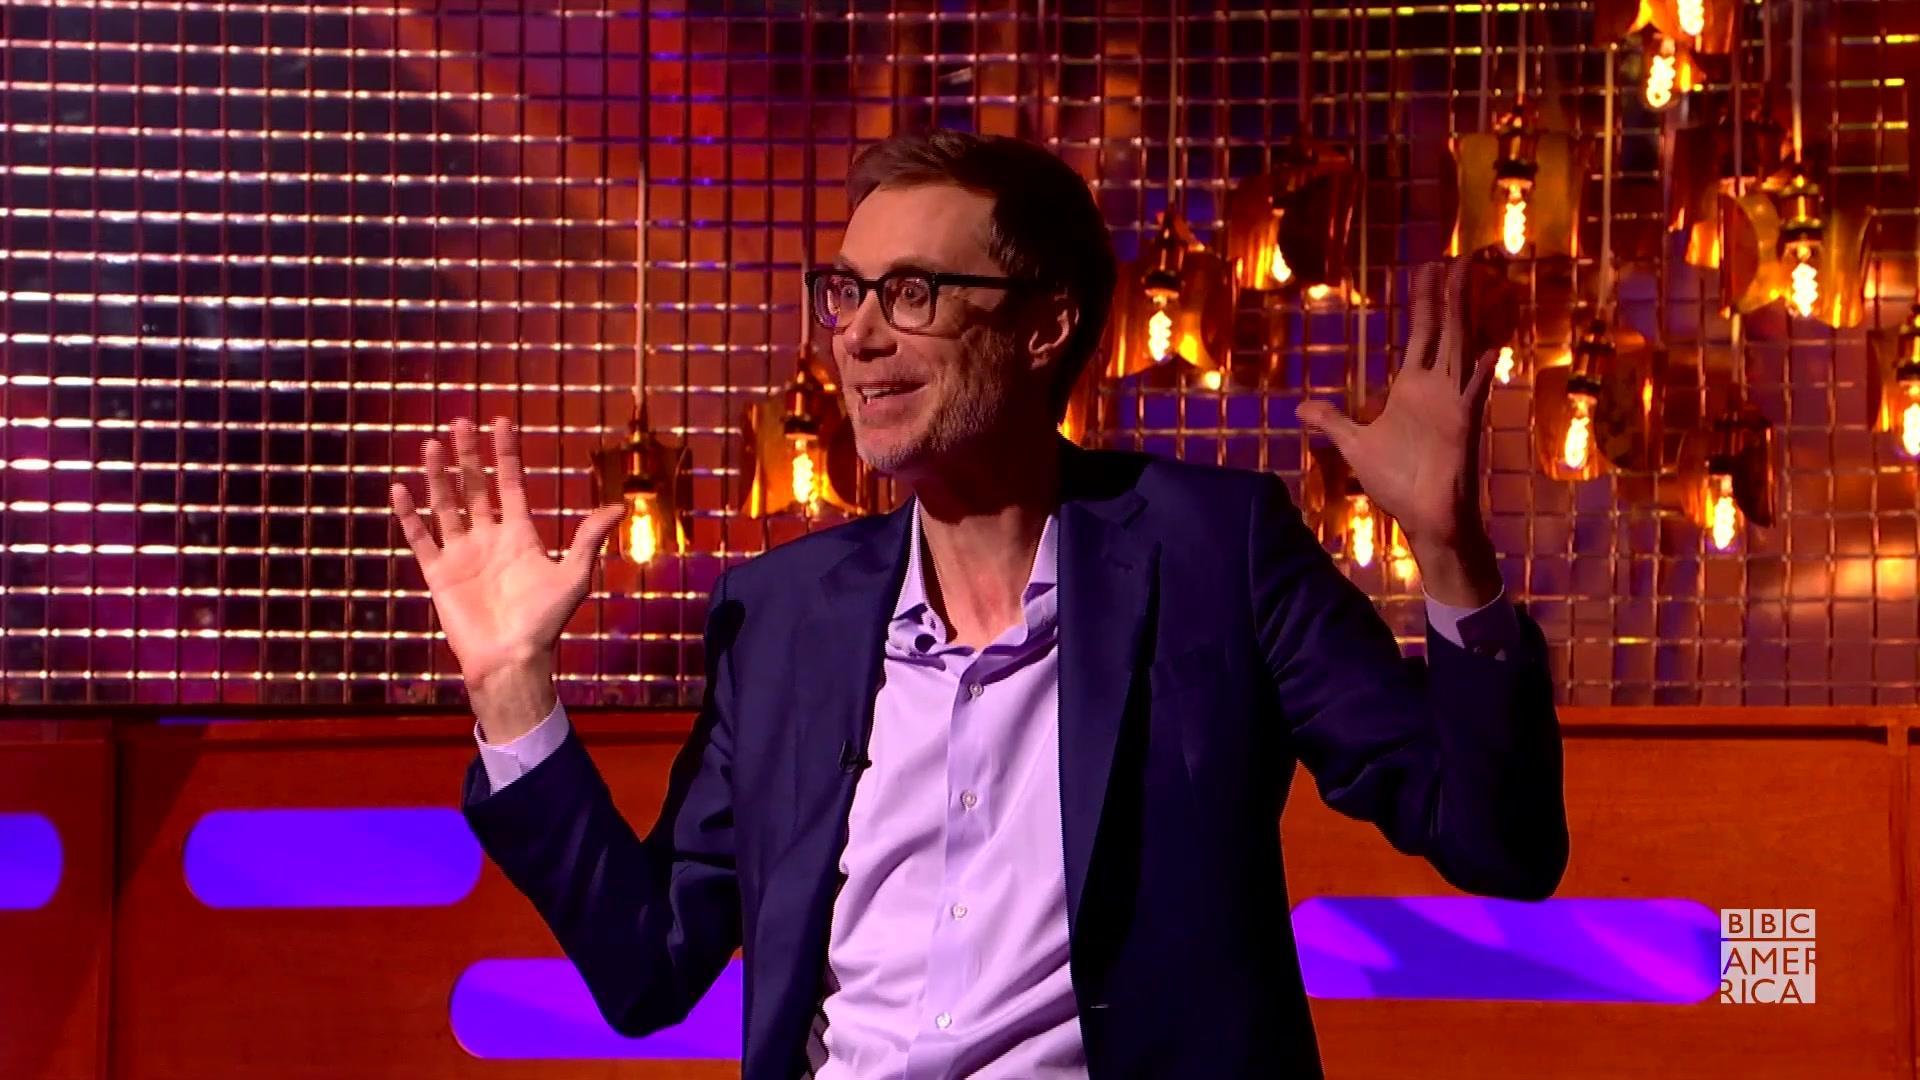 Watch Stephen Merchant Almost Dropped a Crowd-Surfing Bruce Springsteen | The Graham Norton Show Video Extras